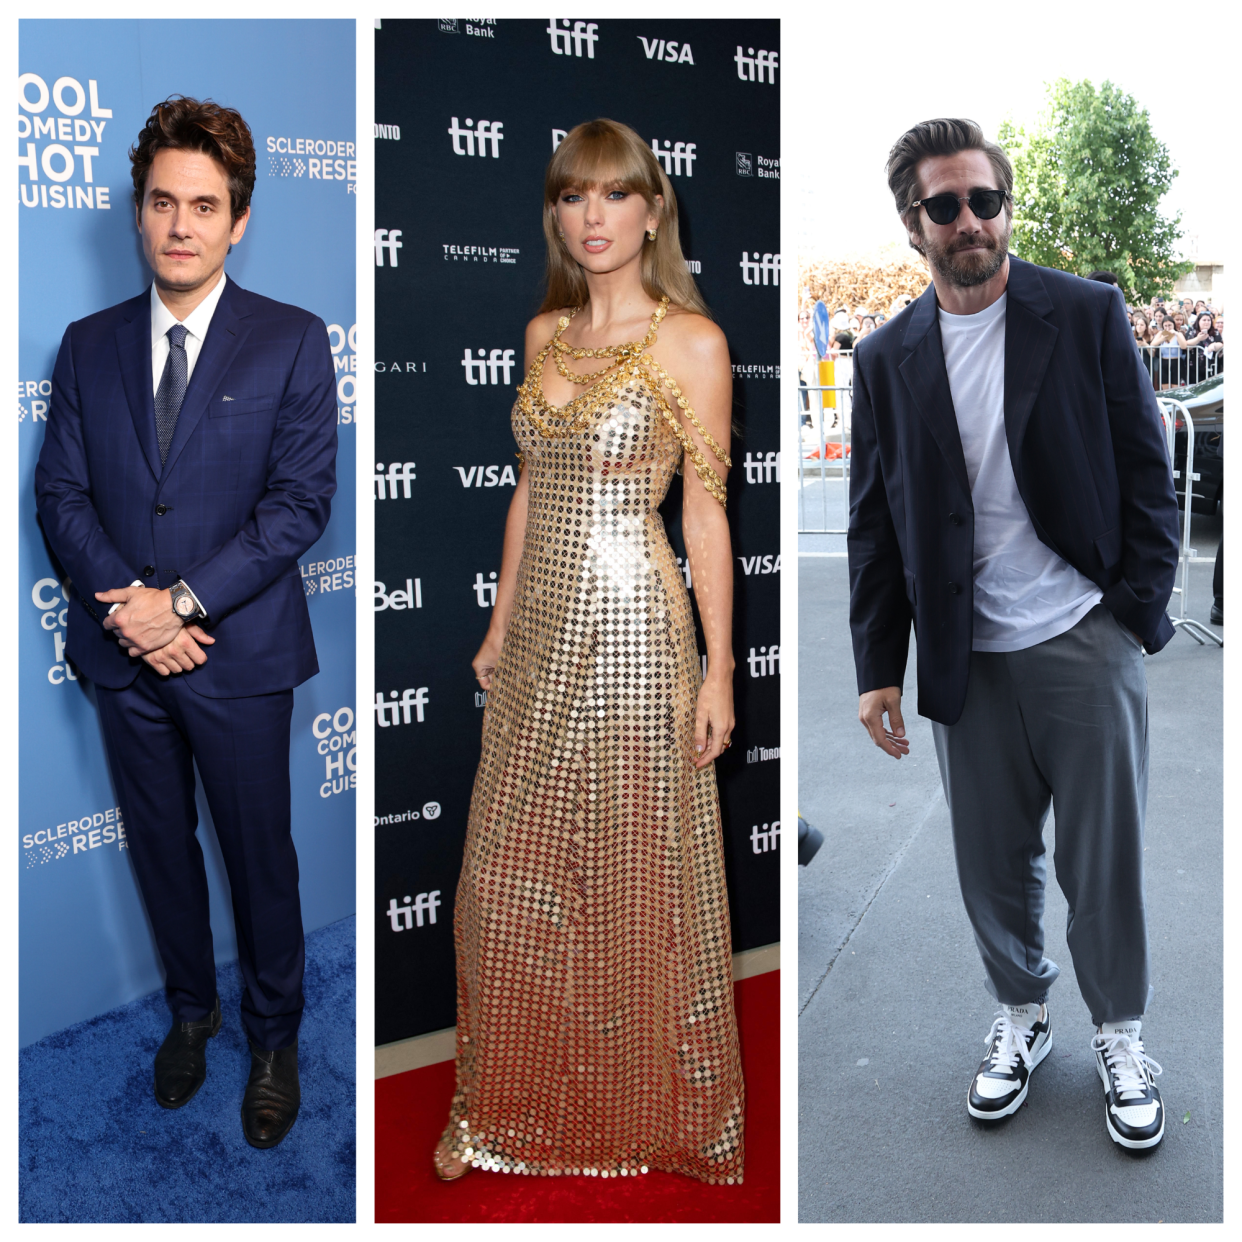 From left to right: John Mayer, Taylor Swift and Jake Gyllenhaal.